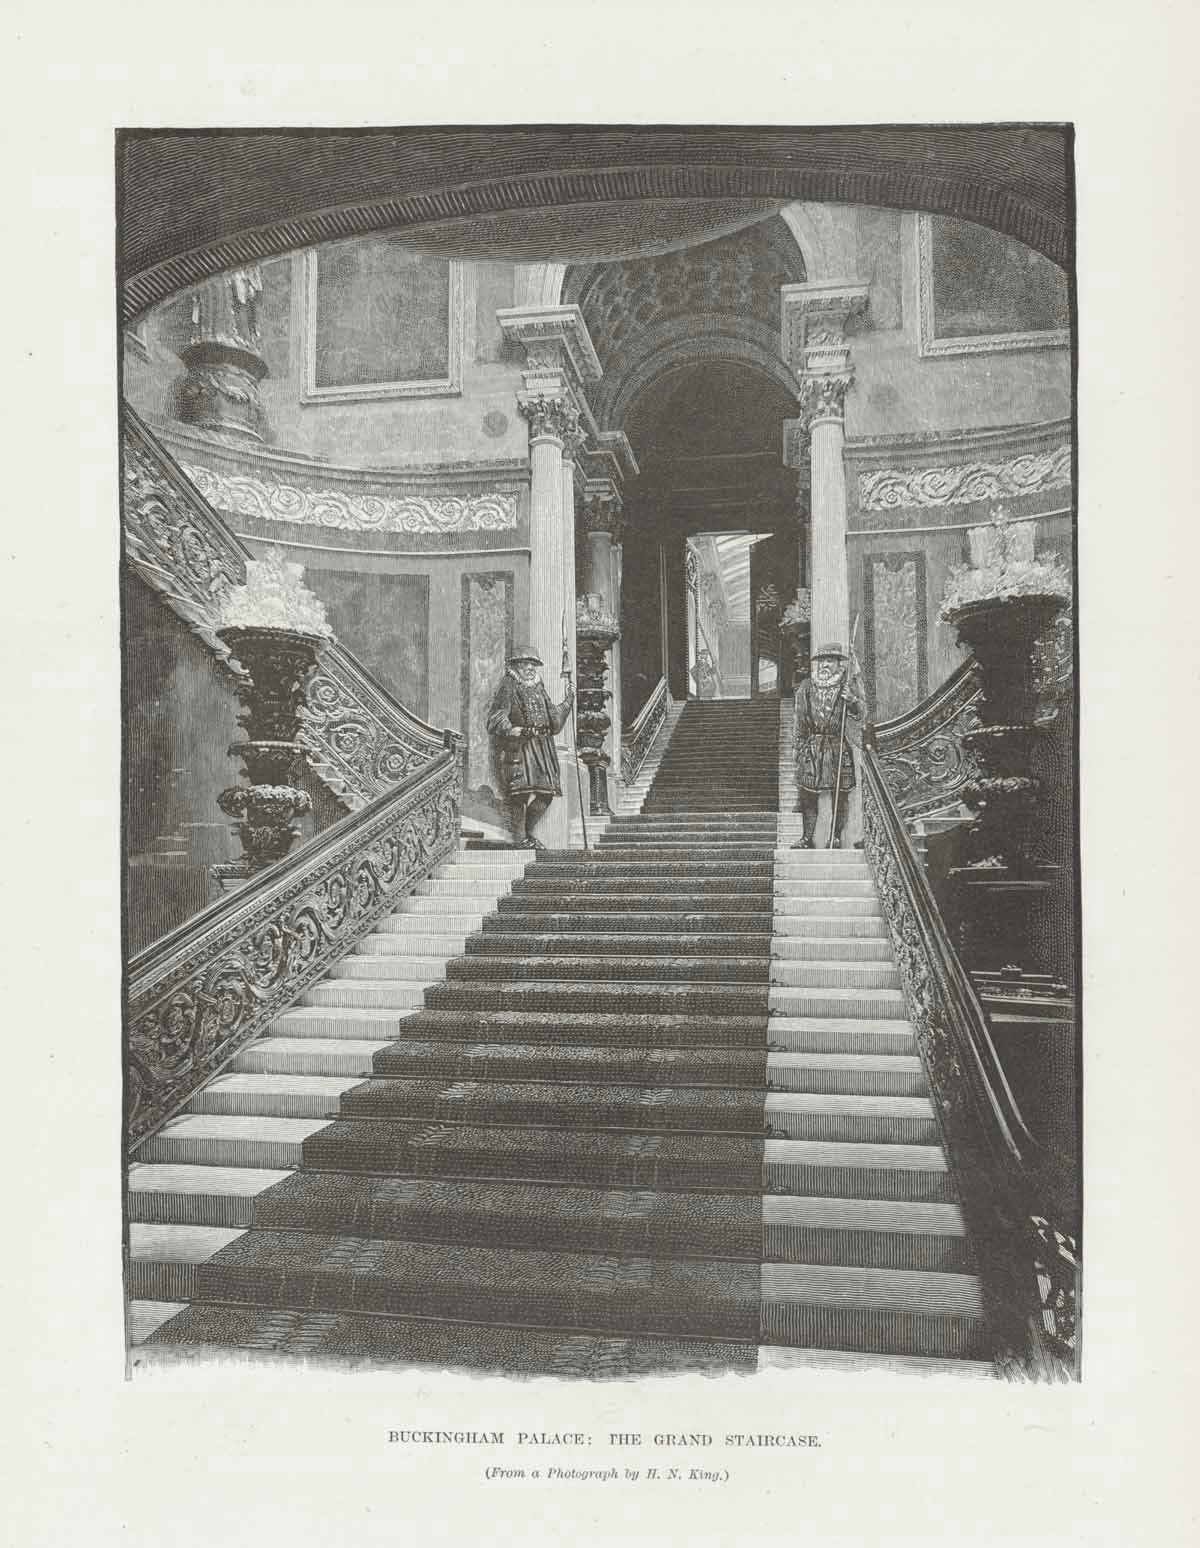 "Buckingham Palace: The Grand Staircase"  Wood engraving made after a photograph by H. N. King. Published 1895. Reverse side is printed.